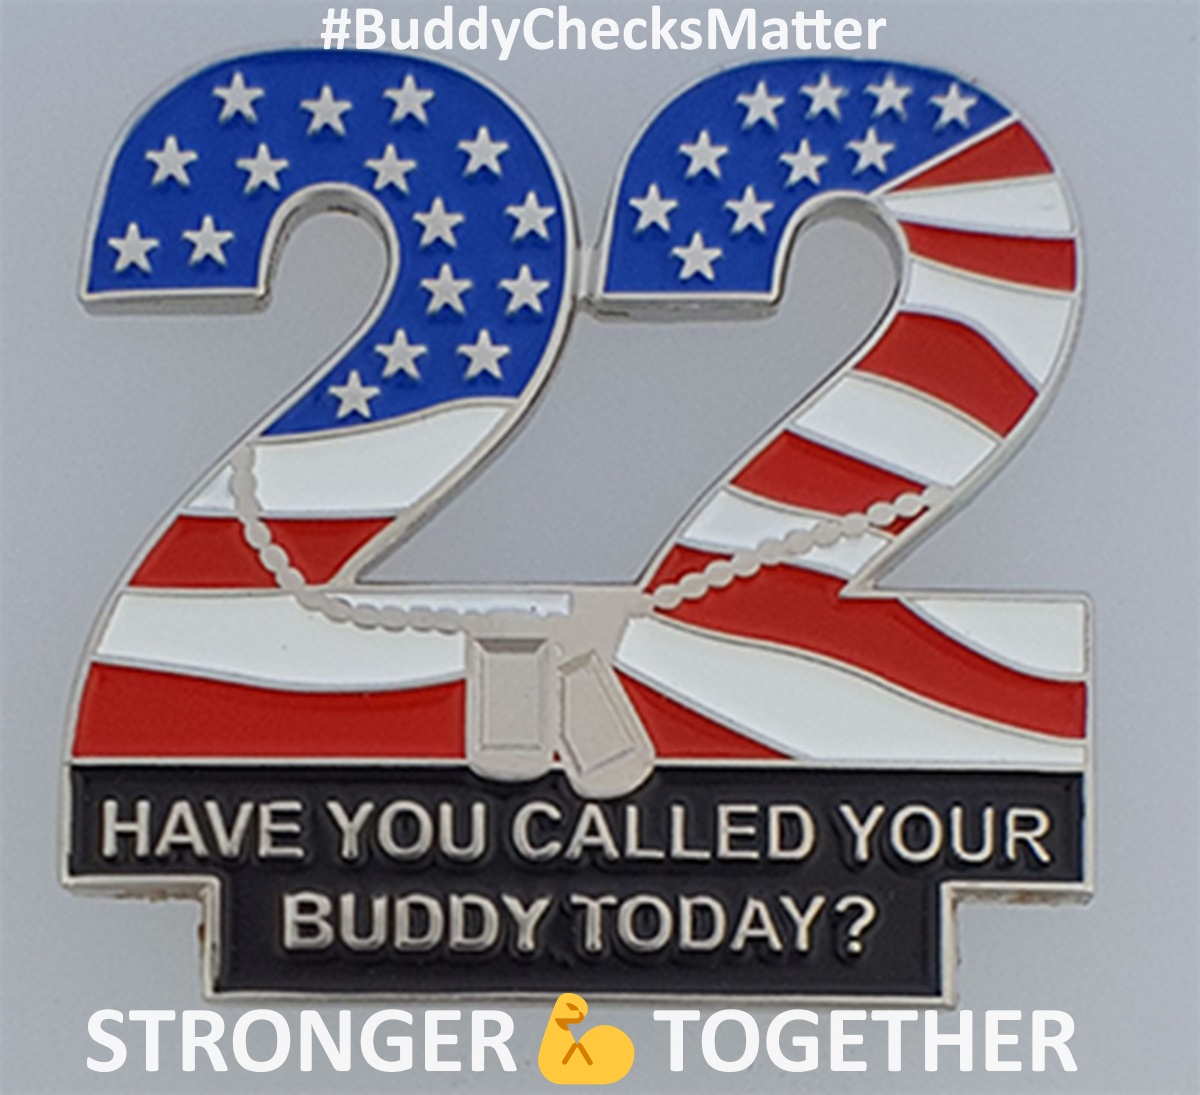 @okhomebody @Bpup501 @Viatorc @jawjaboy71 @Echo_5_Delta @bayou_barry @Jennife81374324 @Sarge17157120 @Geeky_Redneck 🇺🇸👊Stronger💪Together👊🇺🇸 A simple 'Repost' helps us to reach more Veterans🙏 Only together can we #EndVeteranSuicide 💪🇺🇸 🇺🇸 #BuddyChecksMatter 🇺🇸 Hope everyone has a good day🙏 Always reach out first. Together we can #turn22to0 💪🇺🇸 🇺🇸 🇺🇸🟢TY Charyl for #Buddy ✅👊🇺🇸